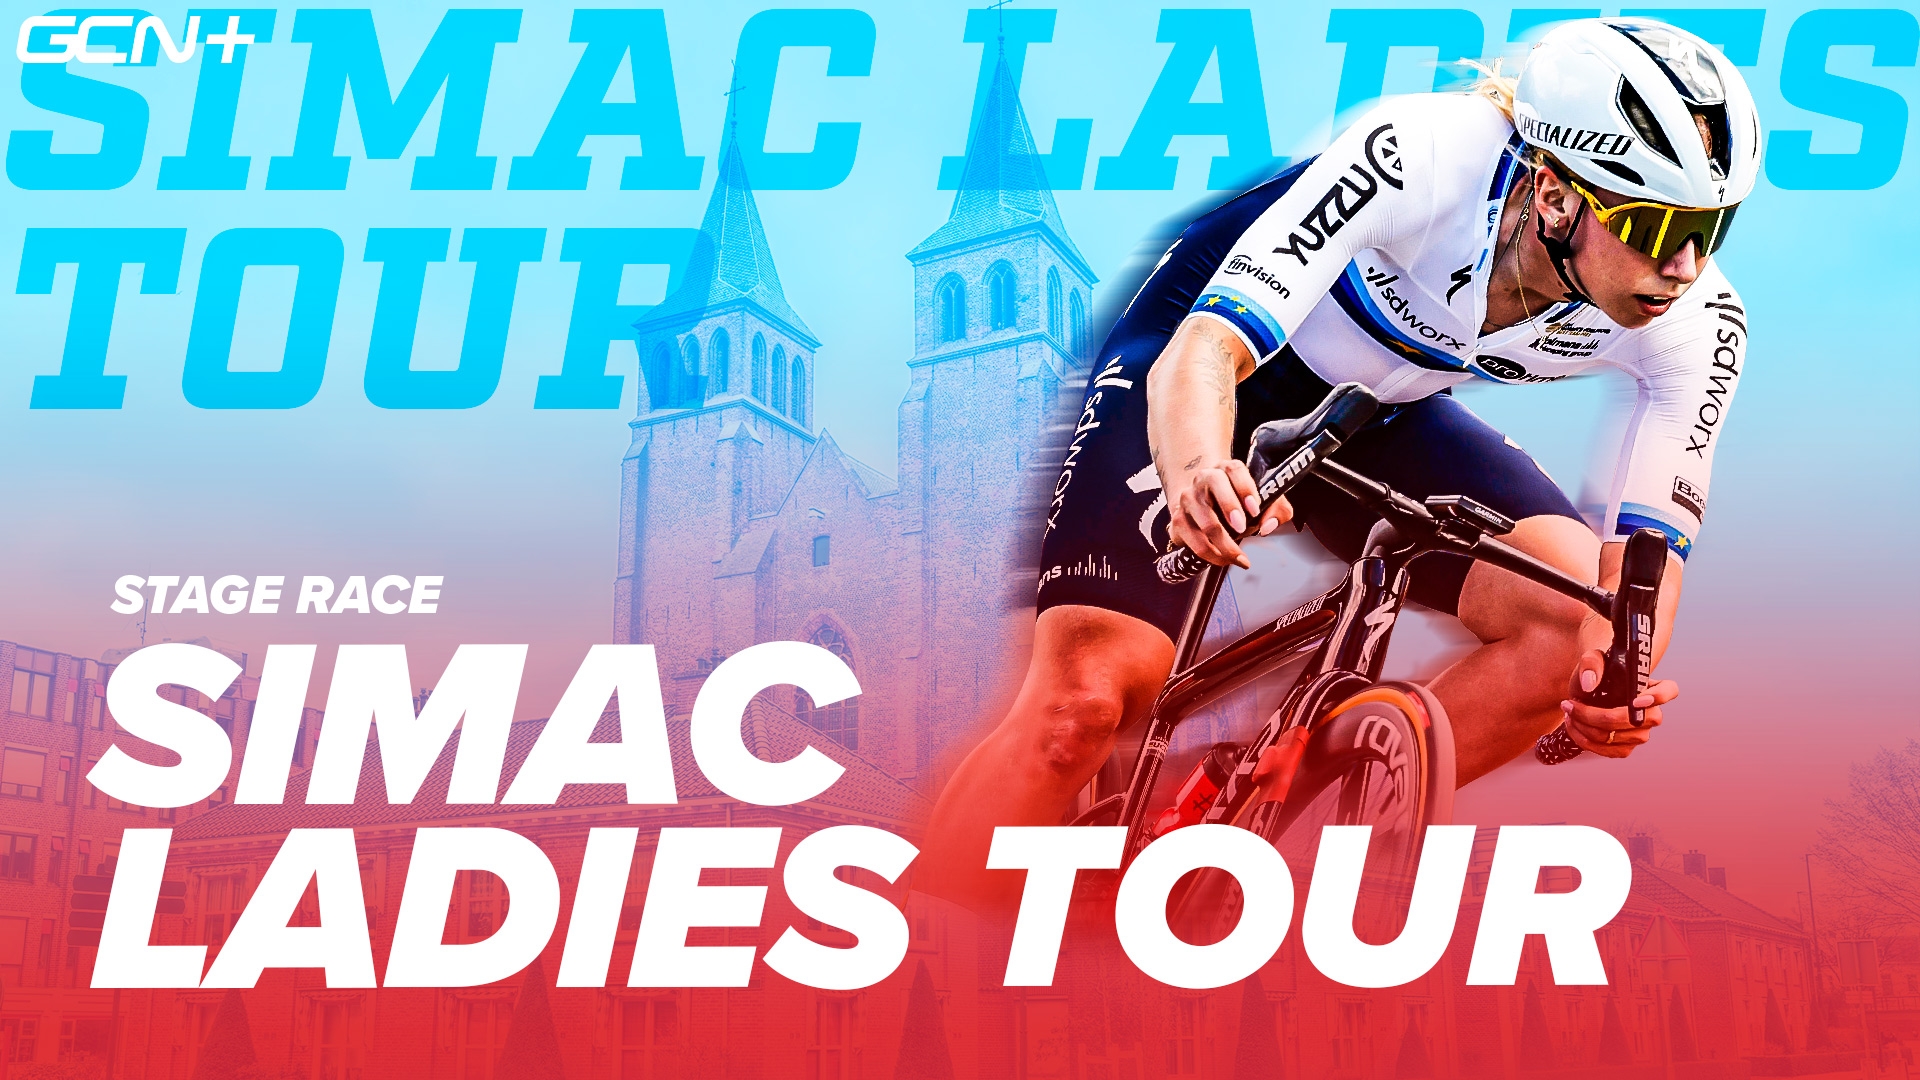 Lotte Kopecky takes her first ever WorldTour time trial victory in Simac  Ladies Tour - Team SD Worx